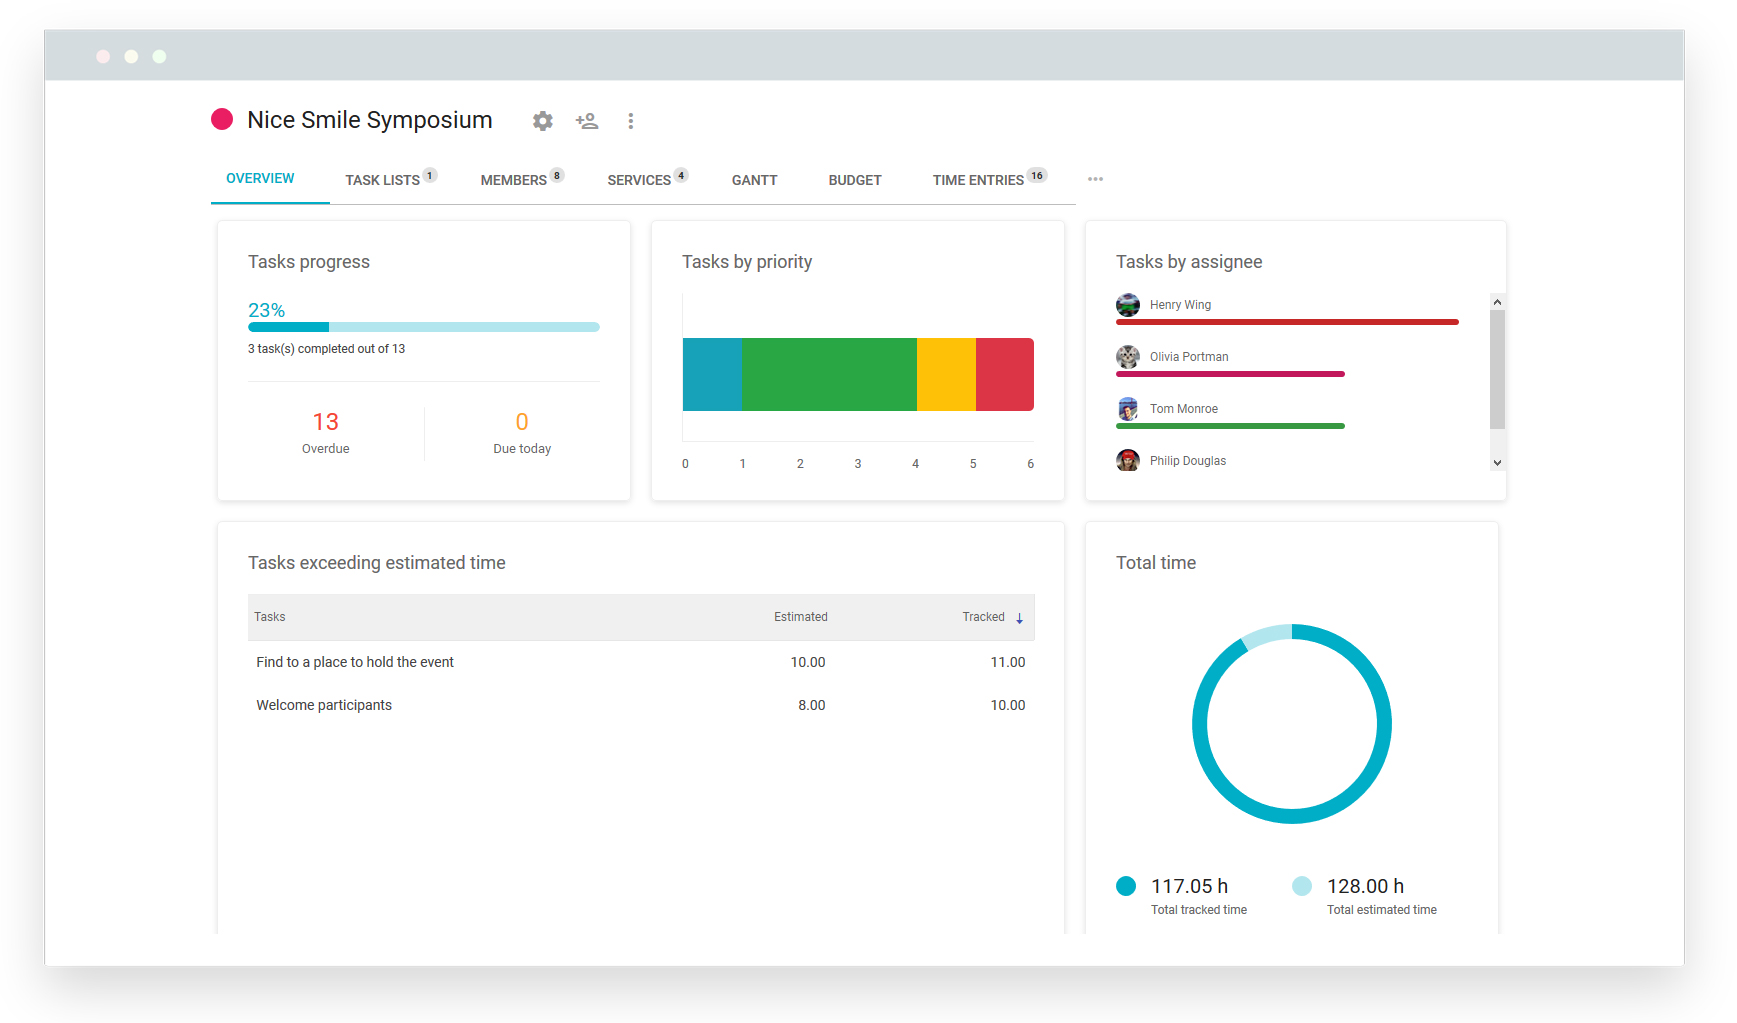 Project dashboard